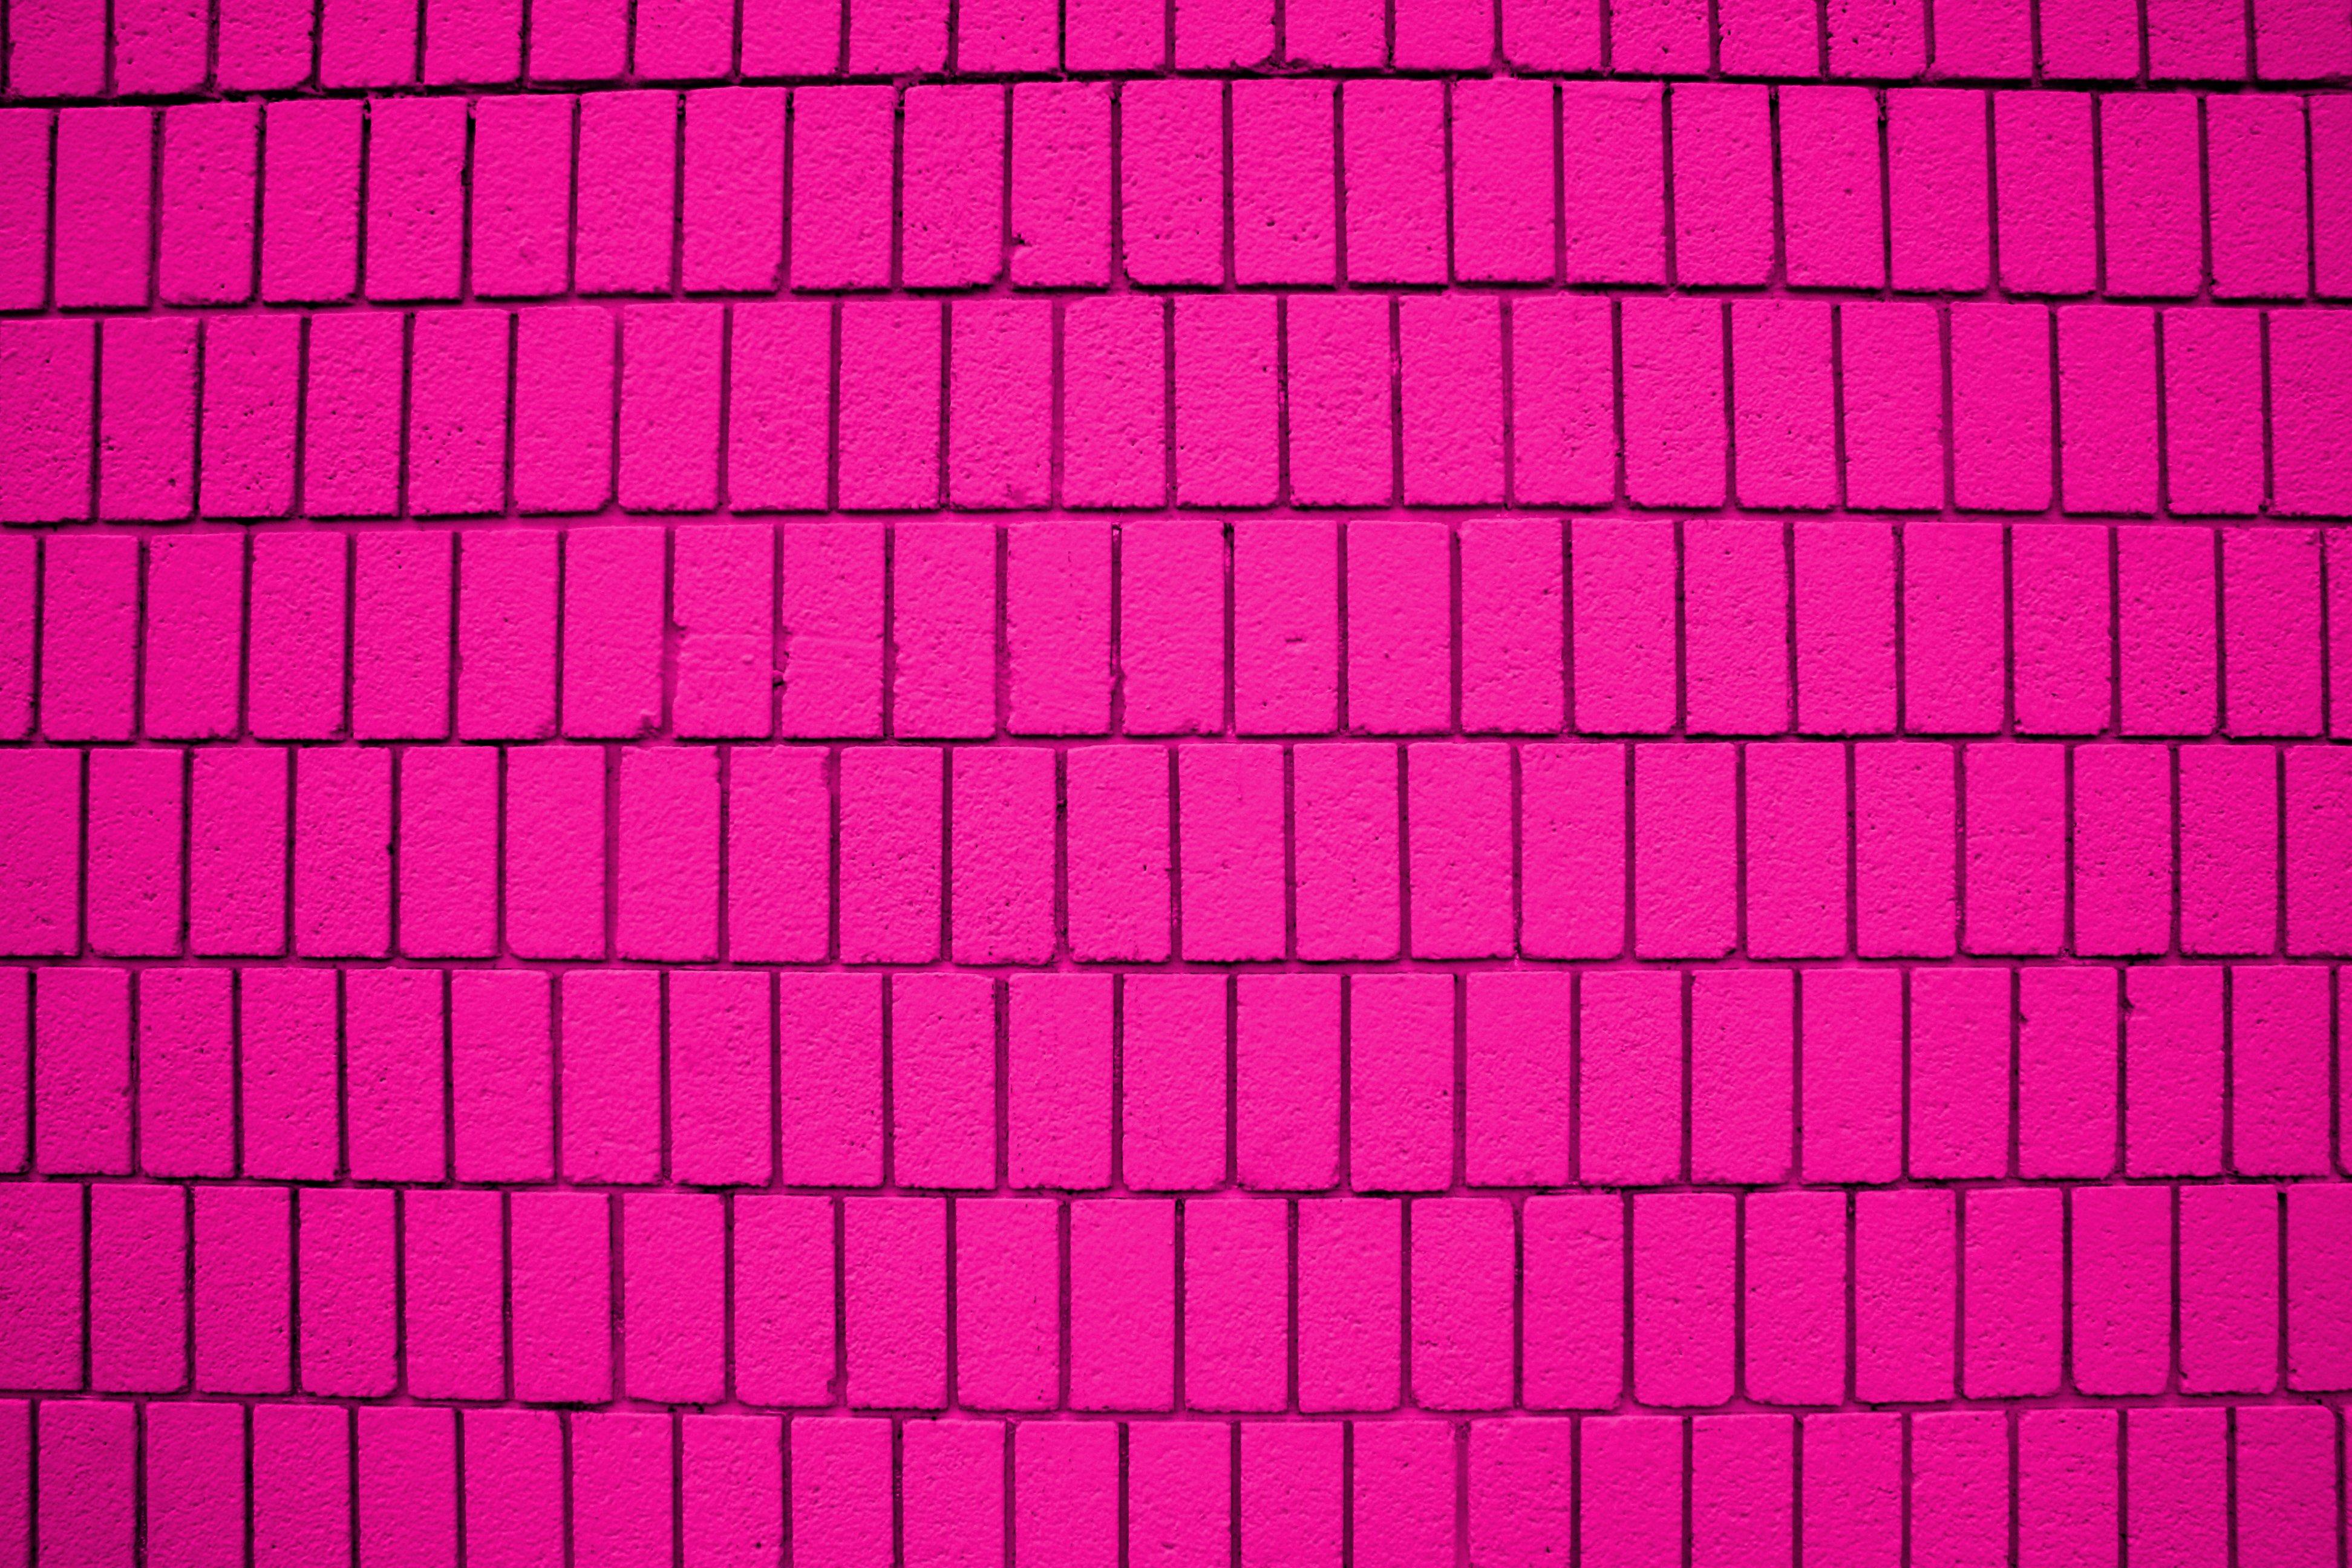 3888 x 2592 · jpeg - Hot Pink Brick Wall Texture with Vertical Bricks Picture | Free ...